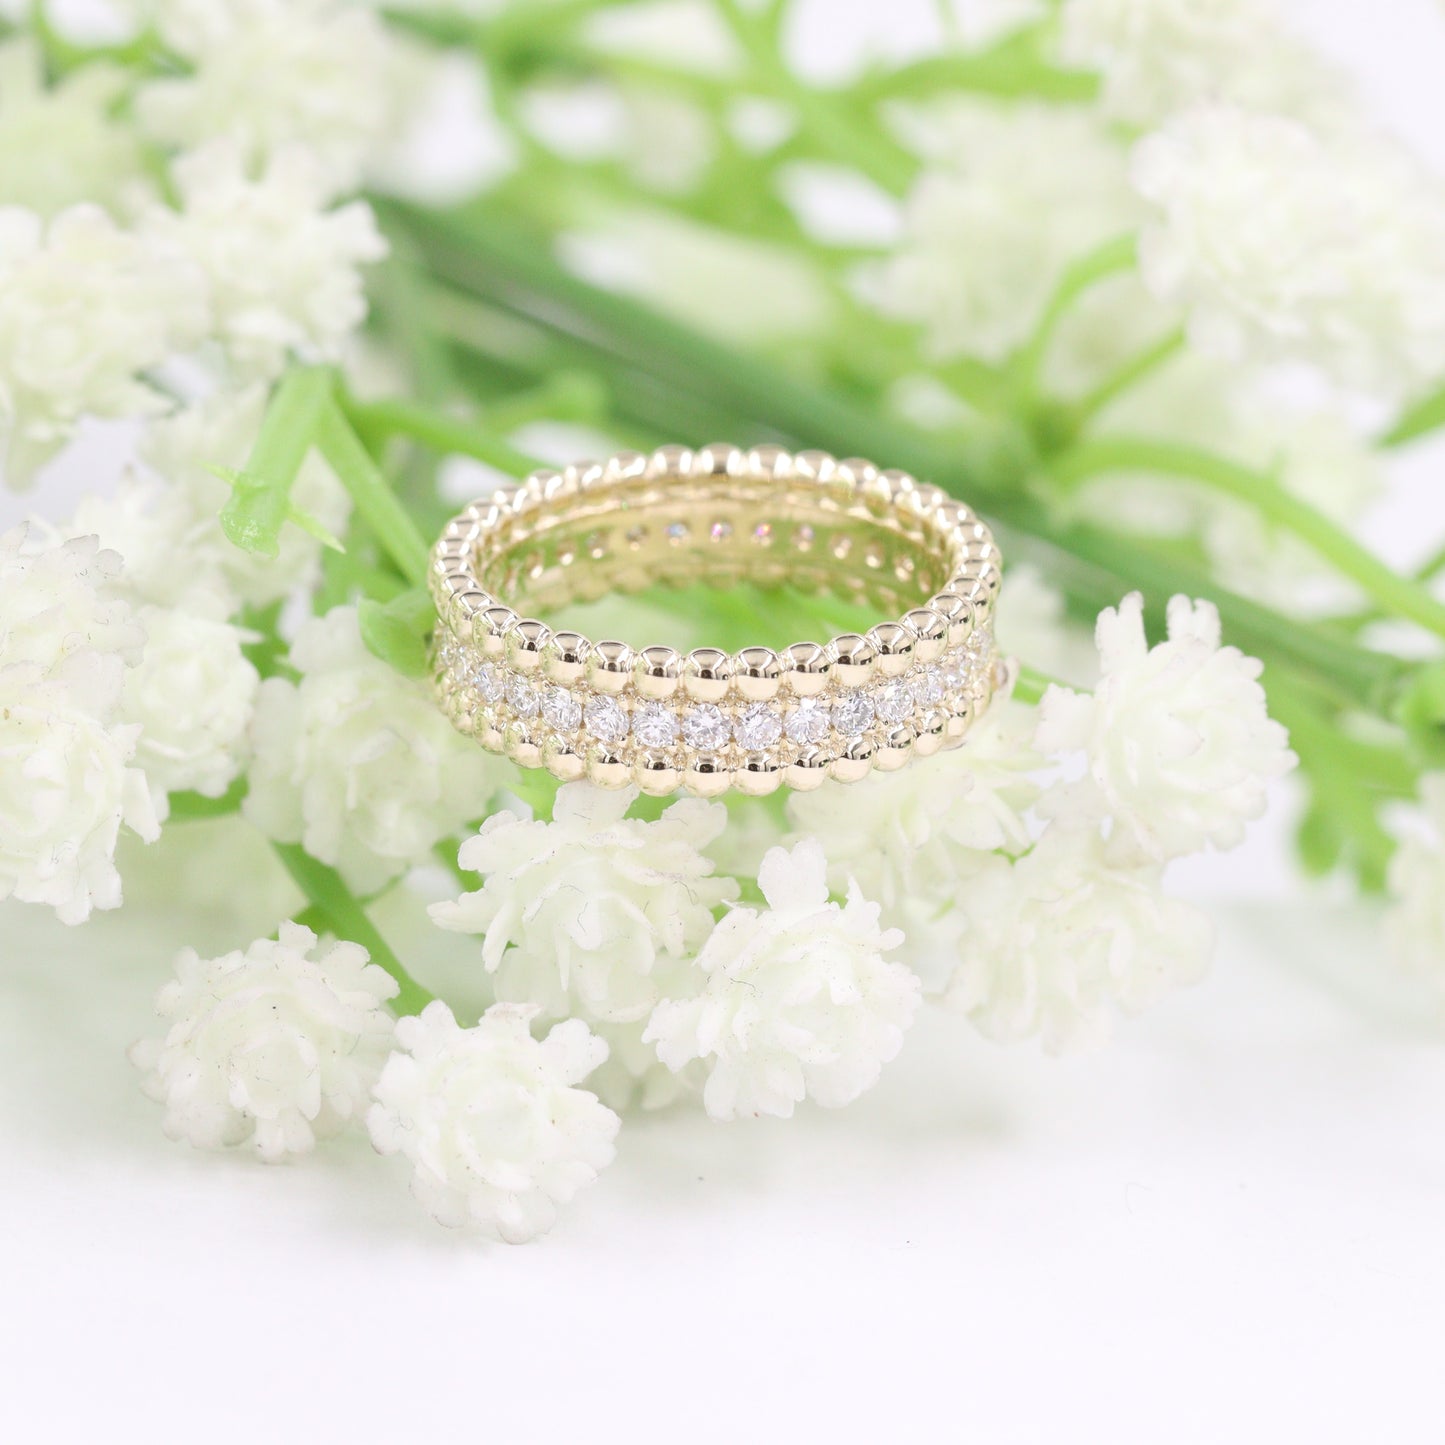 Diamond Eternity Ring/ Stackable Double Bead Ring/ Delicate Full Diamond Bead Wedding Band/ Diamond Anniversary Ring/ Gift for her